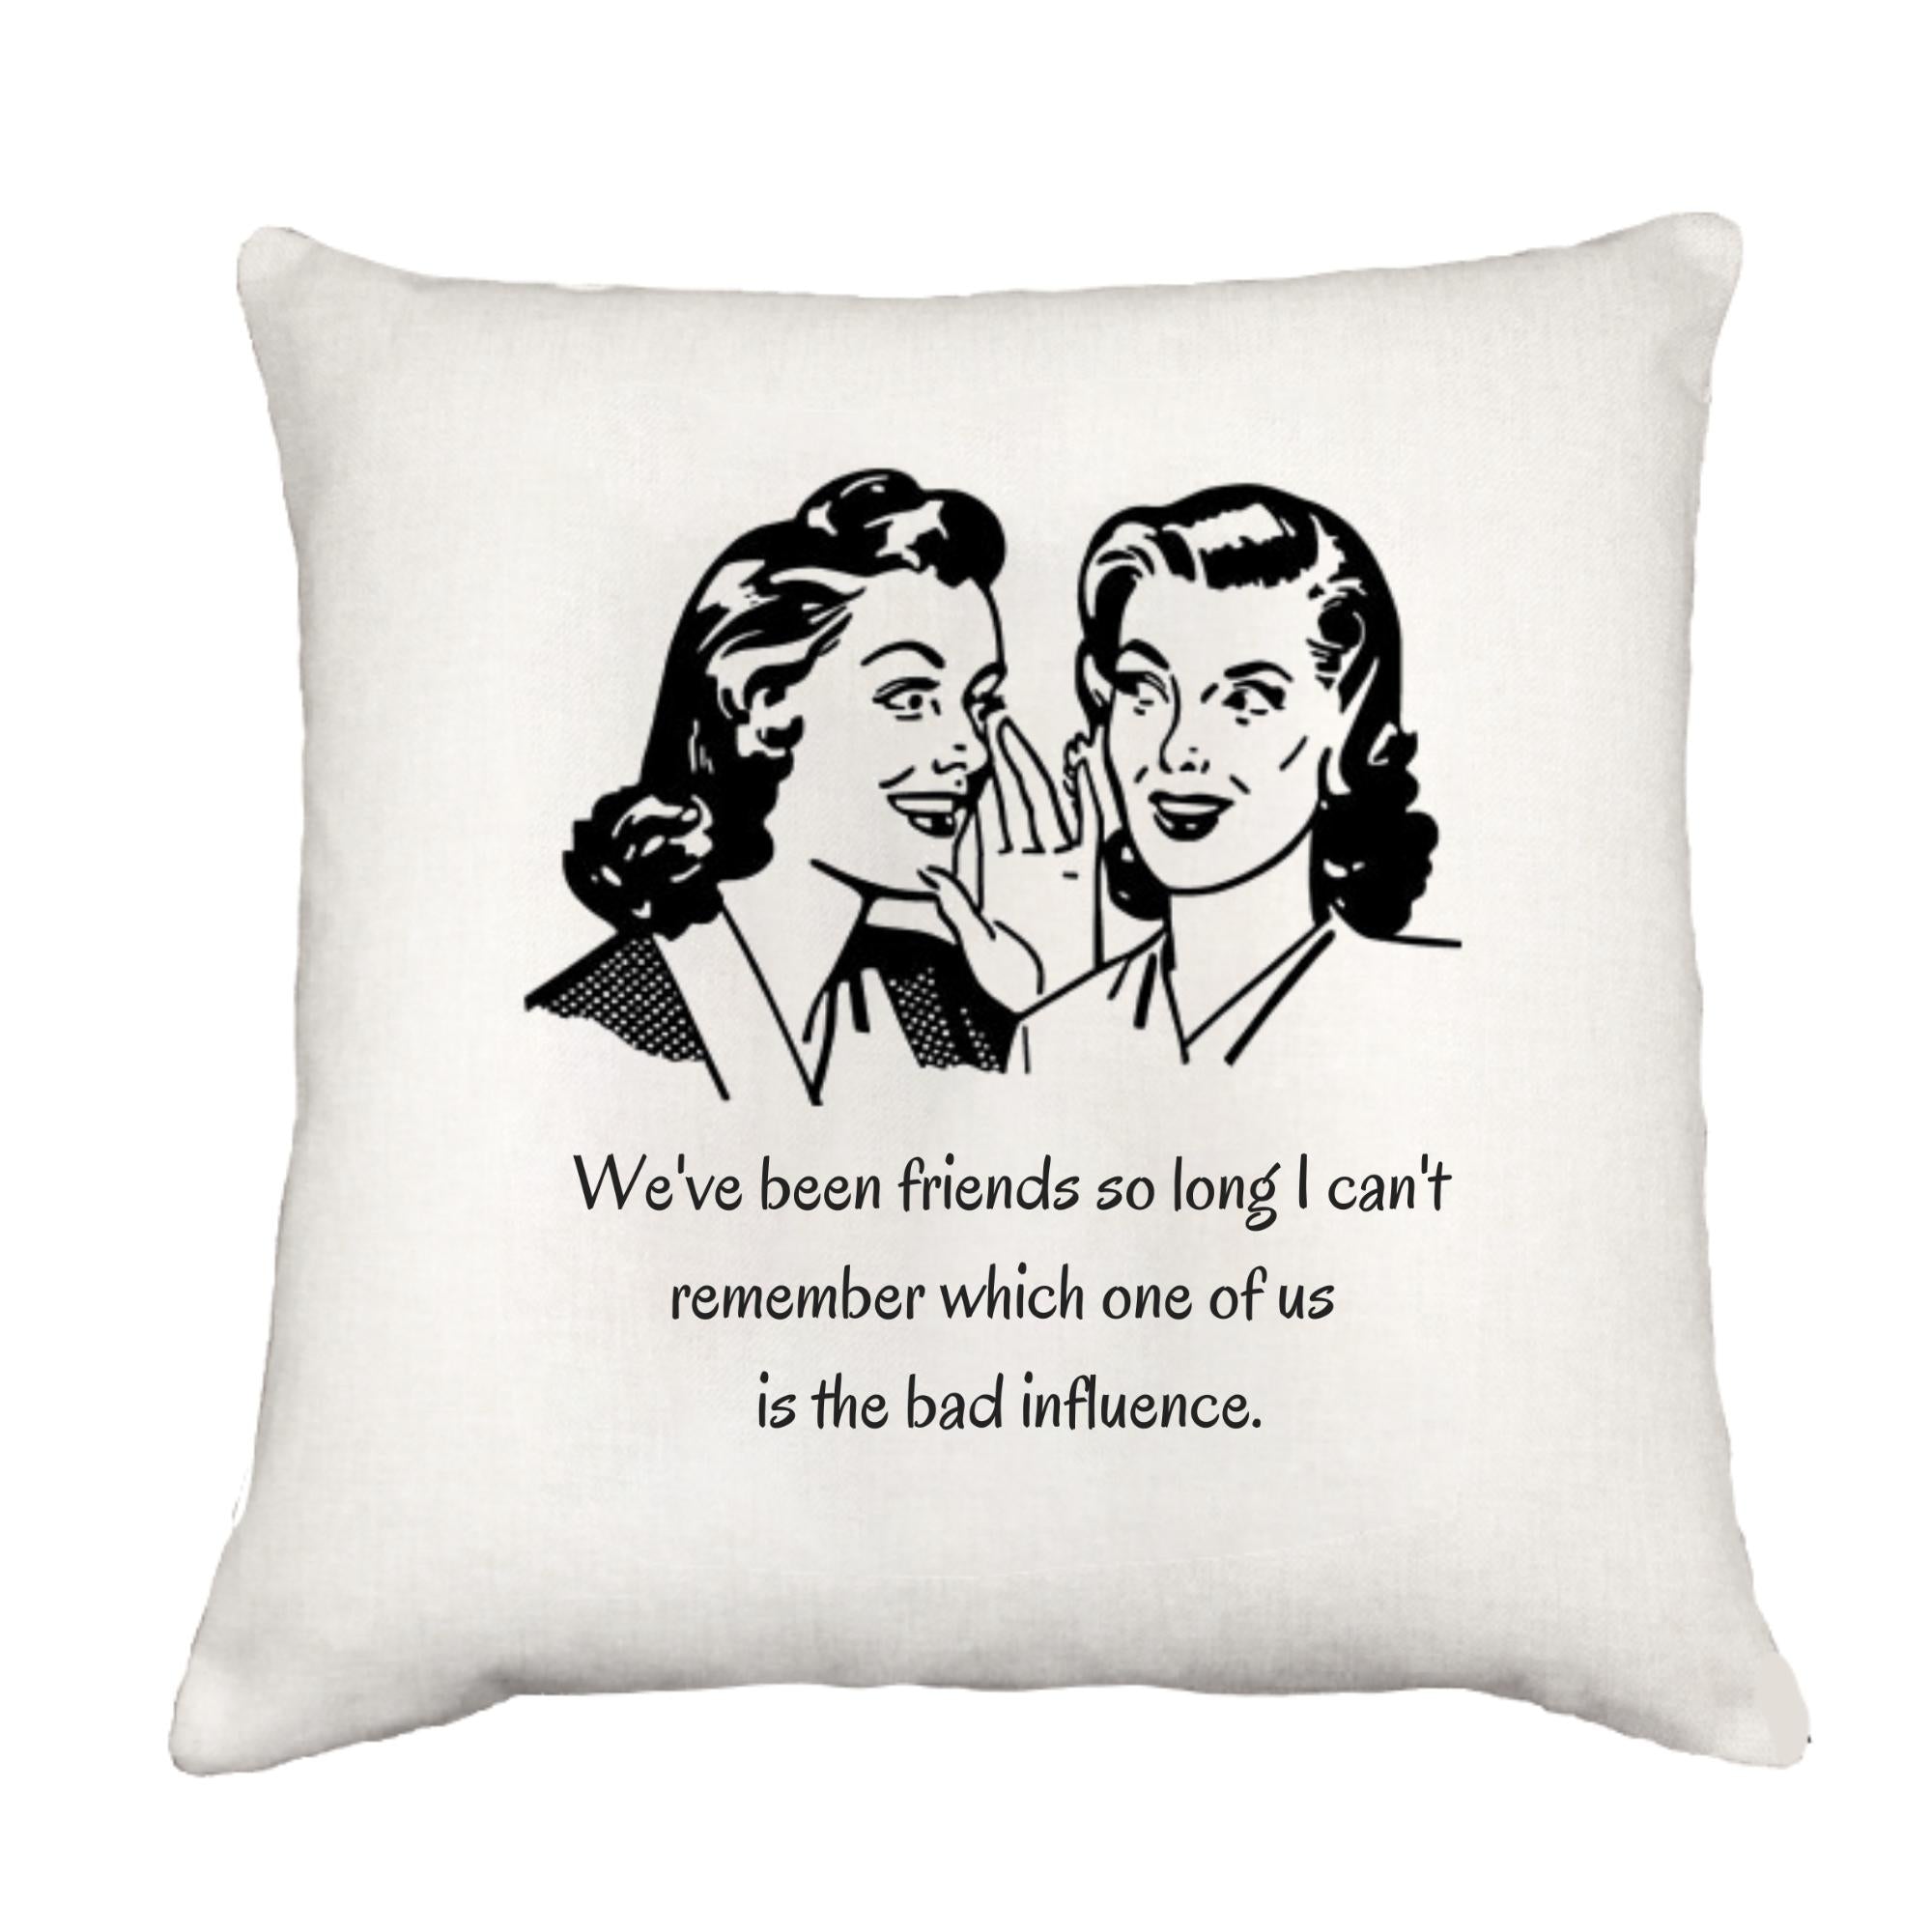 Bad Influence Cottage Pillow Throw/Decorative Pillow - Southern Sisters